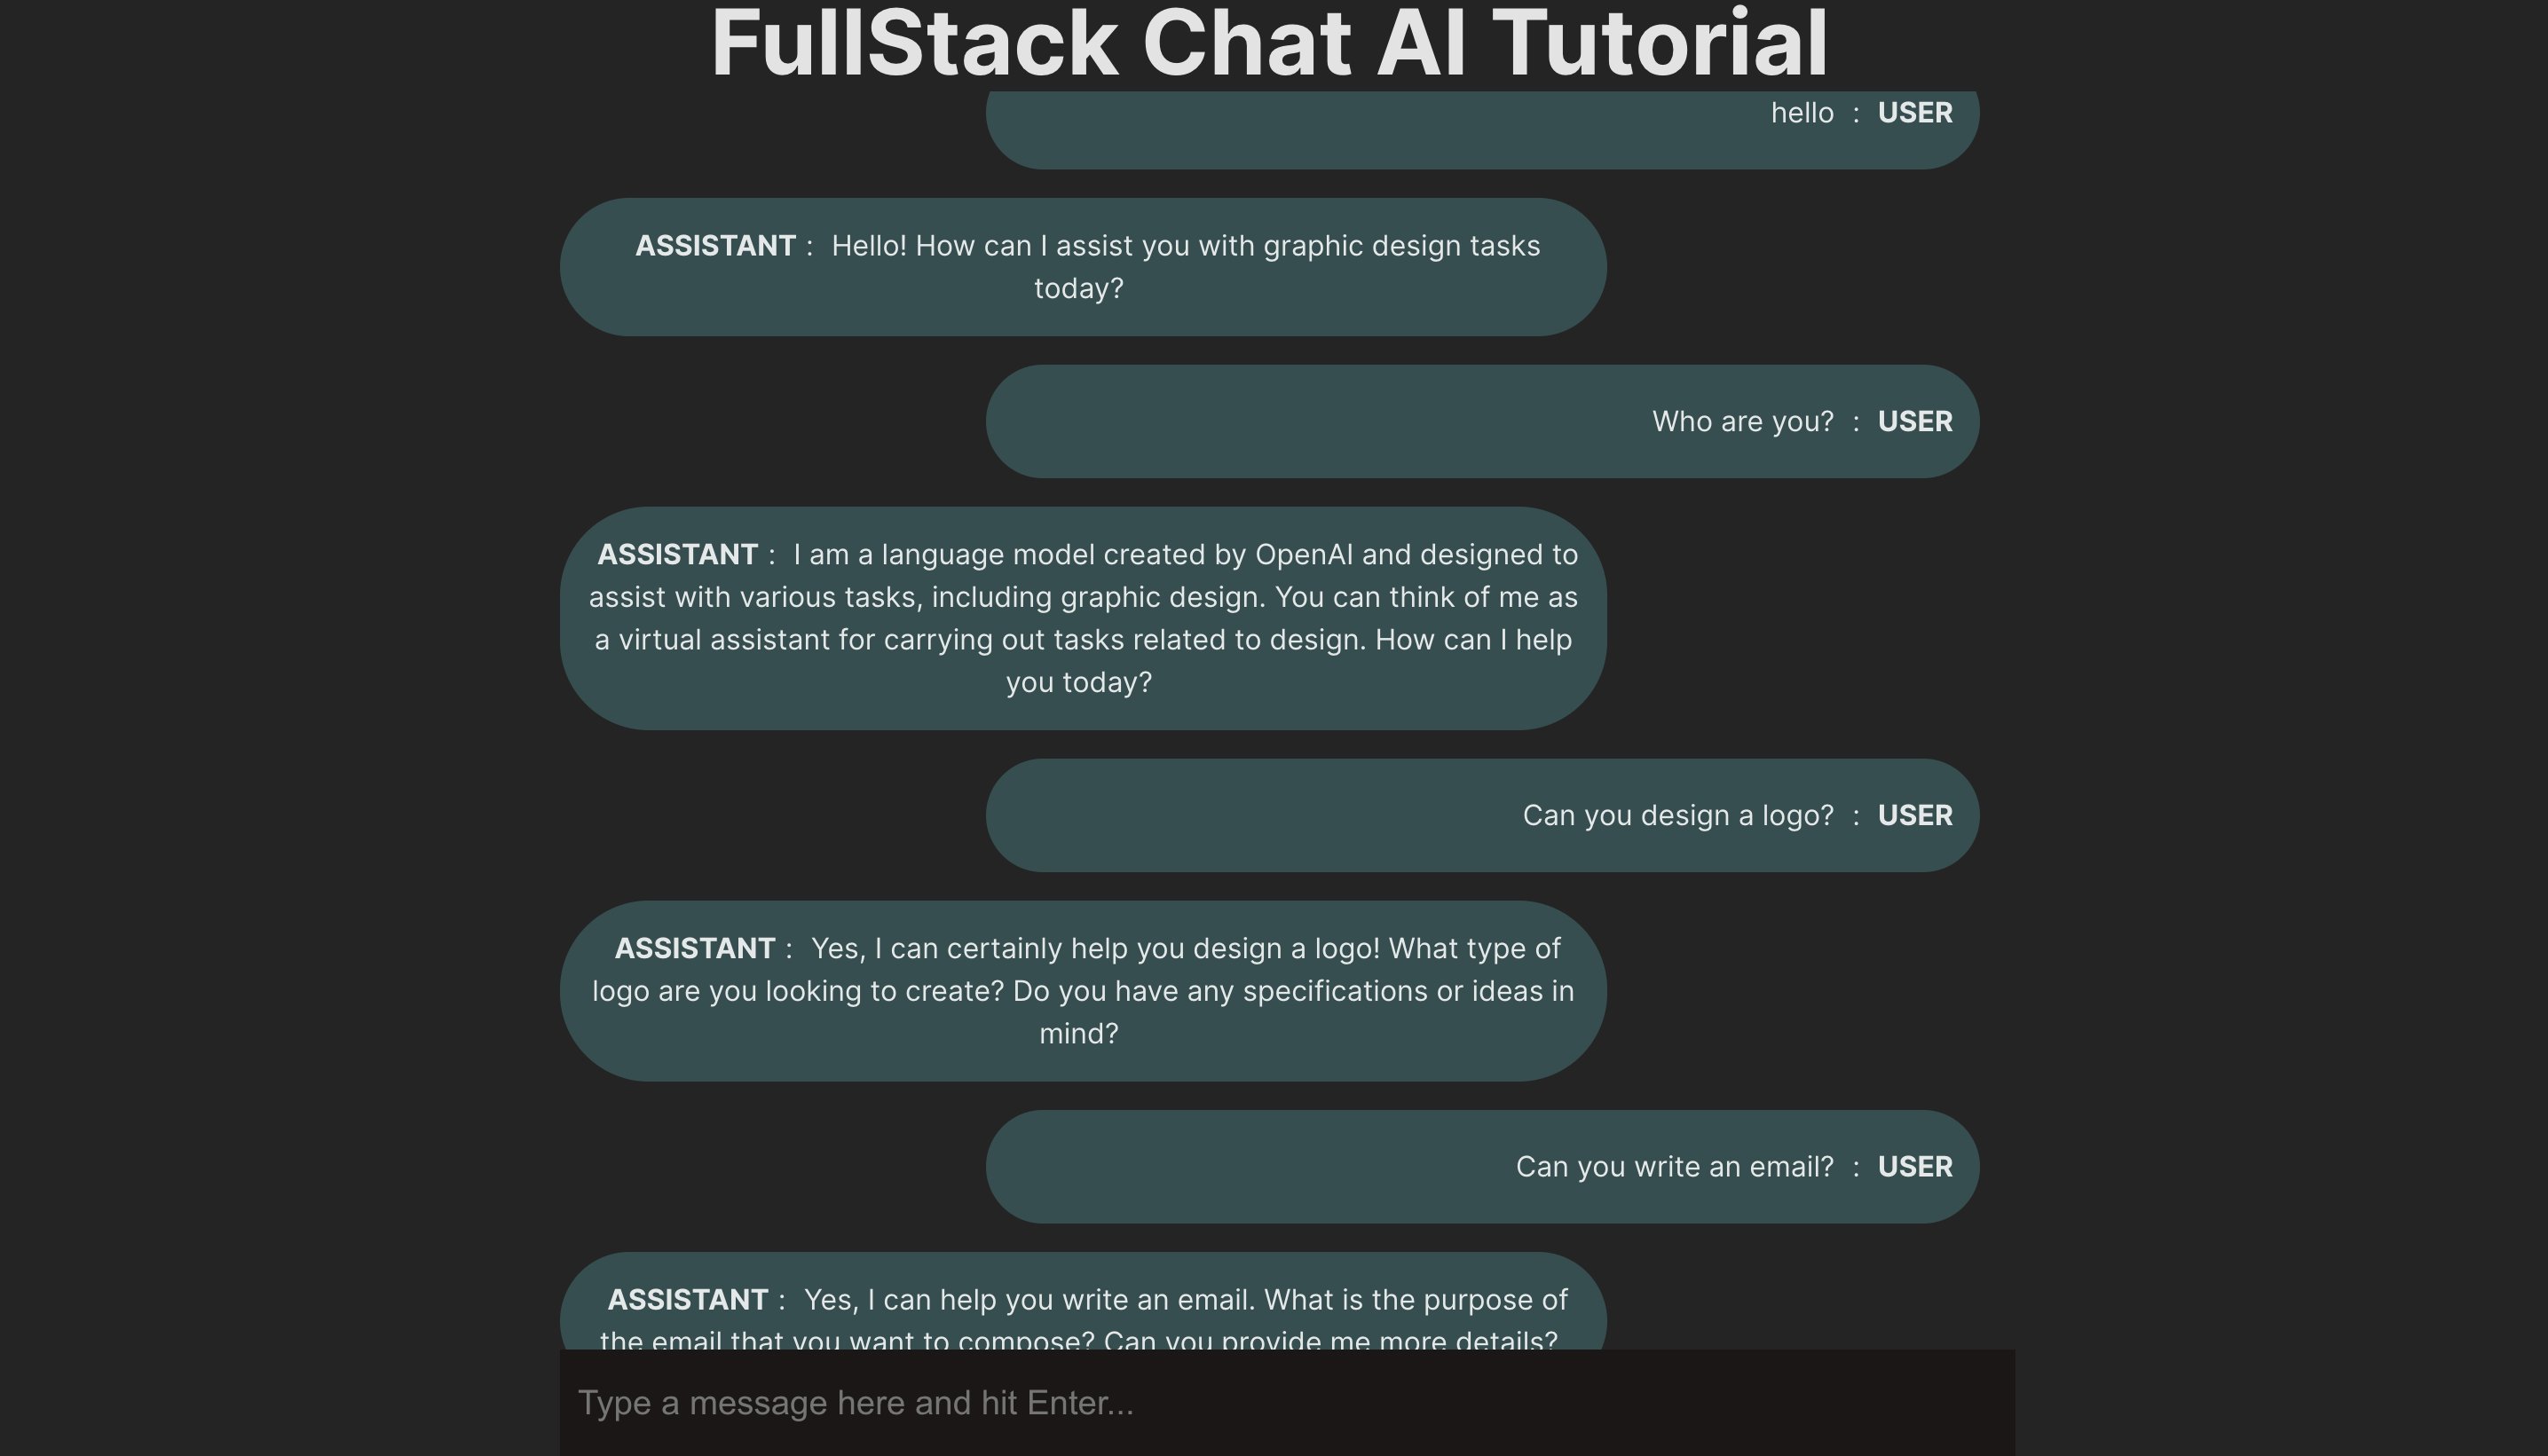 FullStack ChatBot Working As Expected with CSS